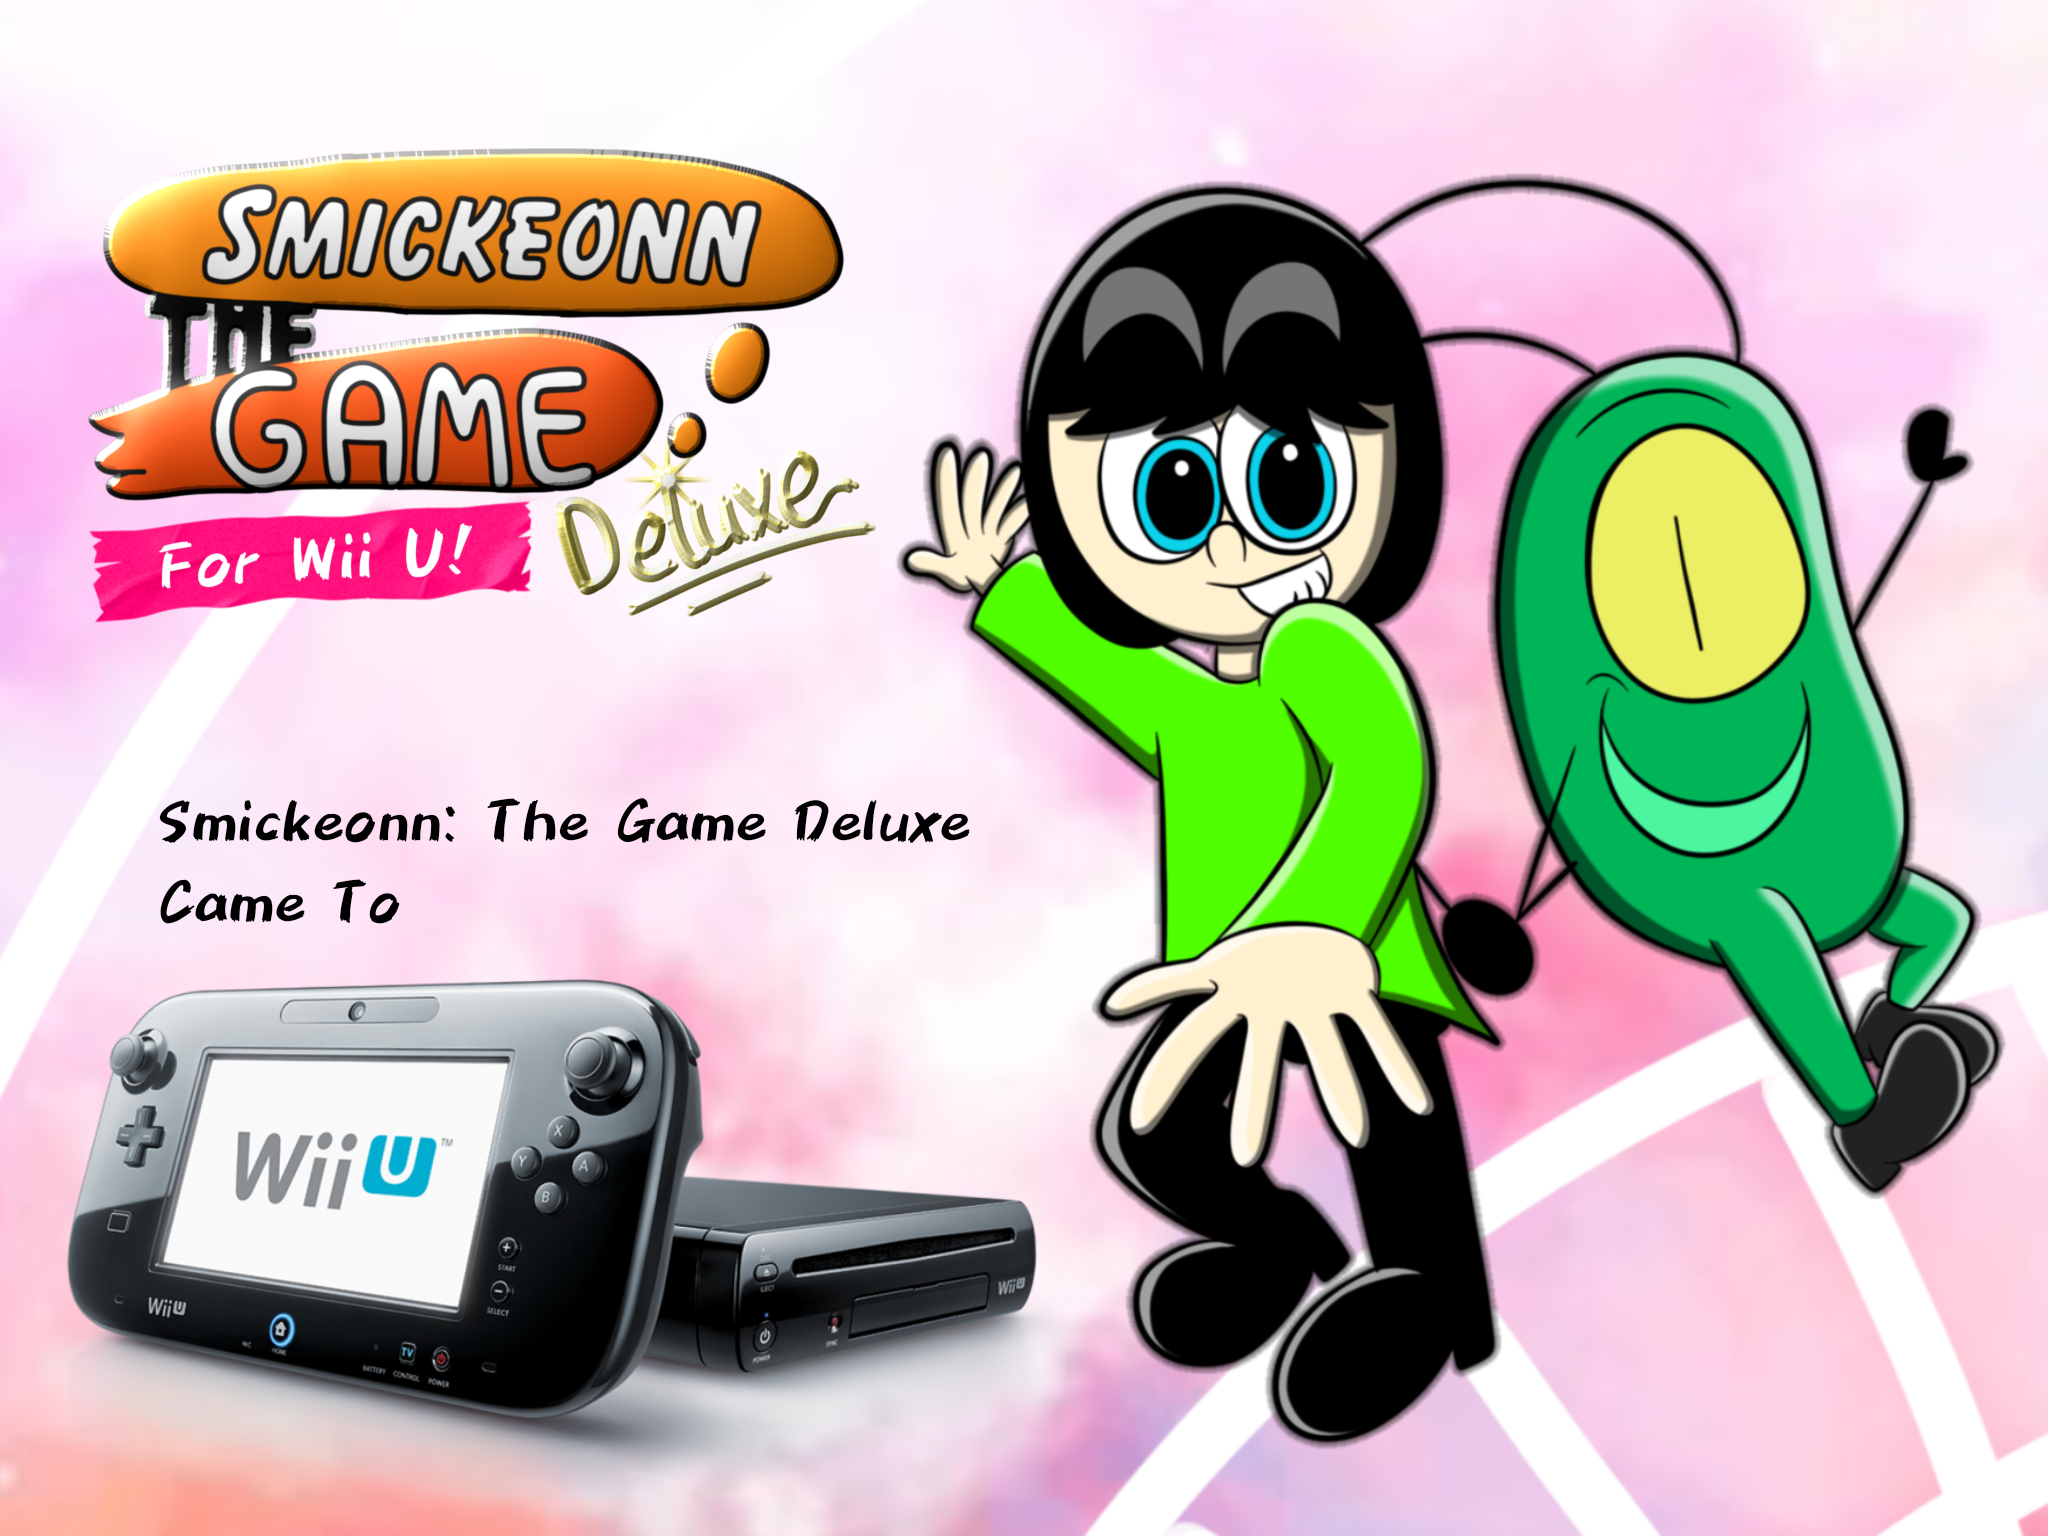 Smickeonn: The Game Deluxe For Wii U